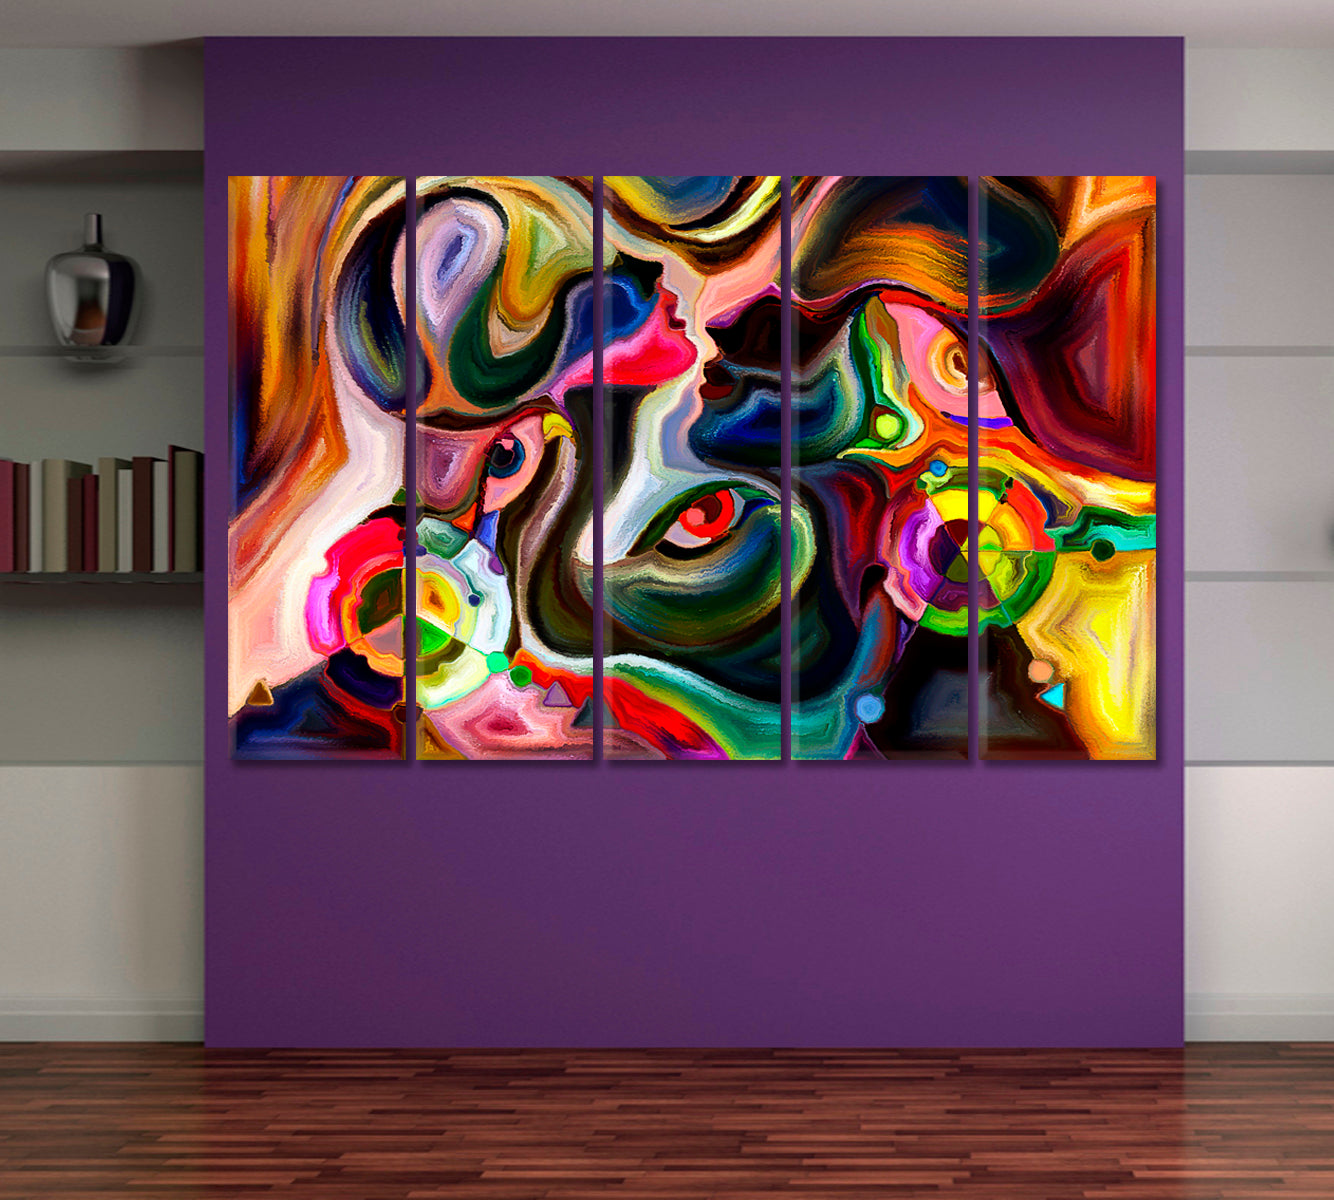 World Inside Of Colors And Shapes Contemporary Art Artesty   